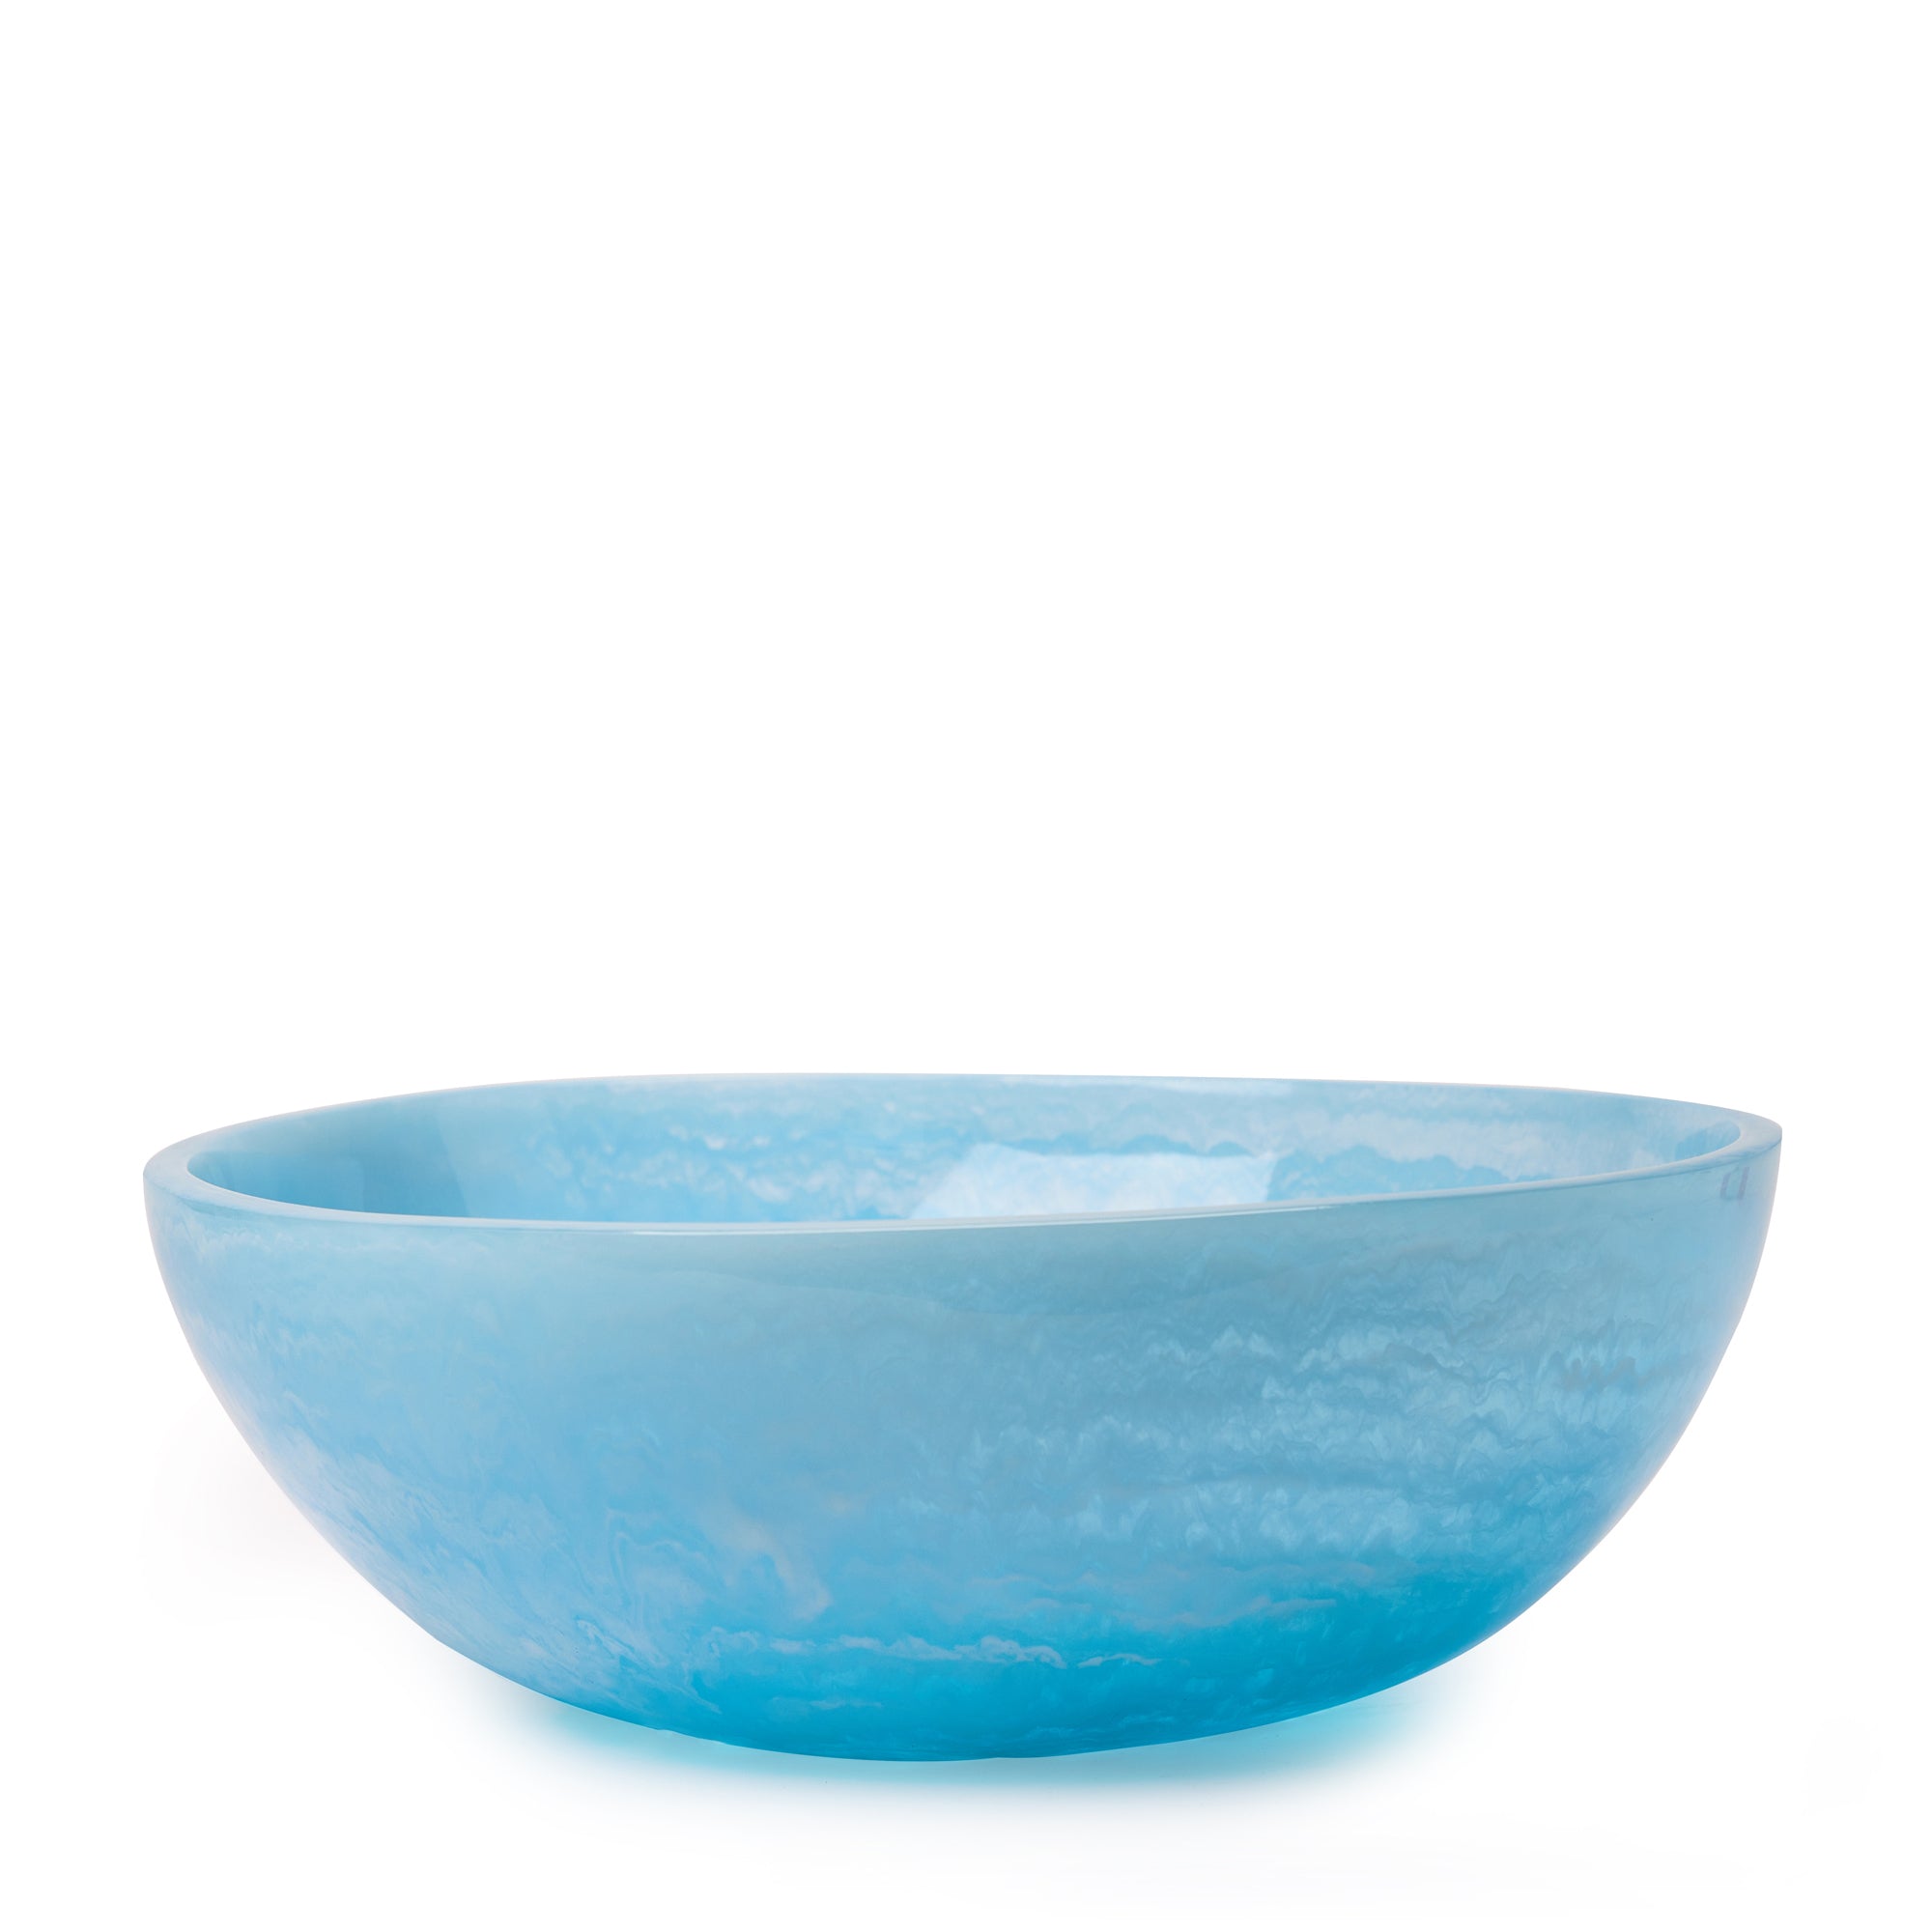 Pamana%20Serving%20Bowl%20in%20Sky%20Blue%20Gloss image 1